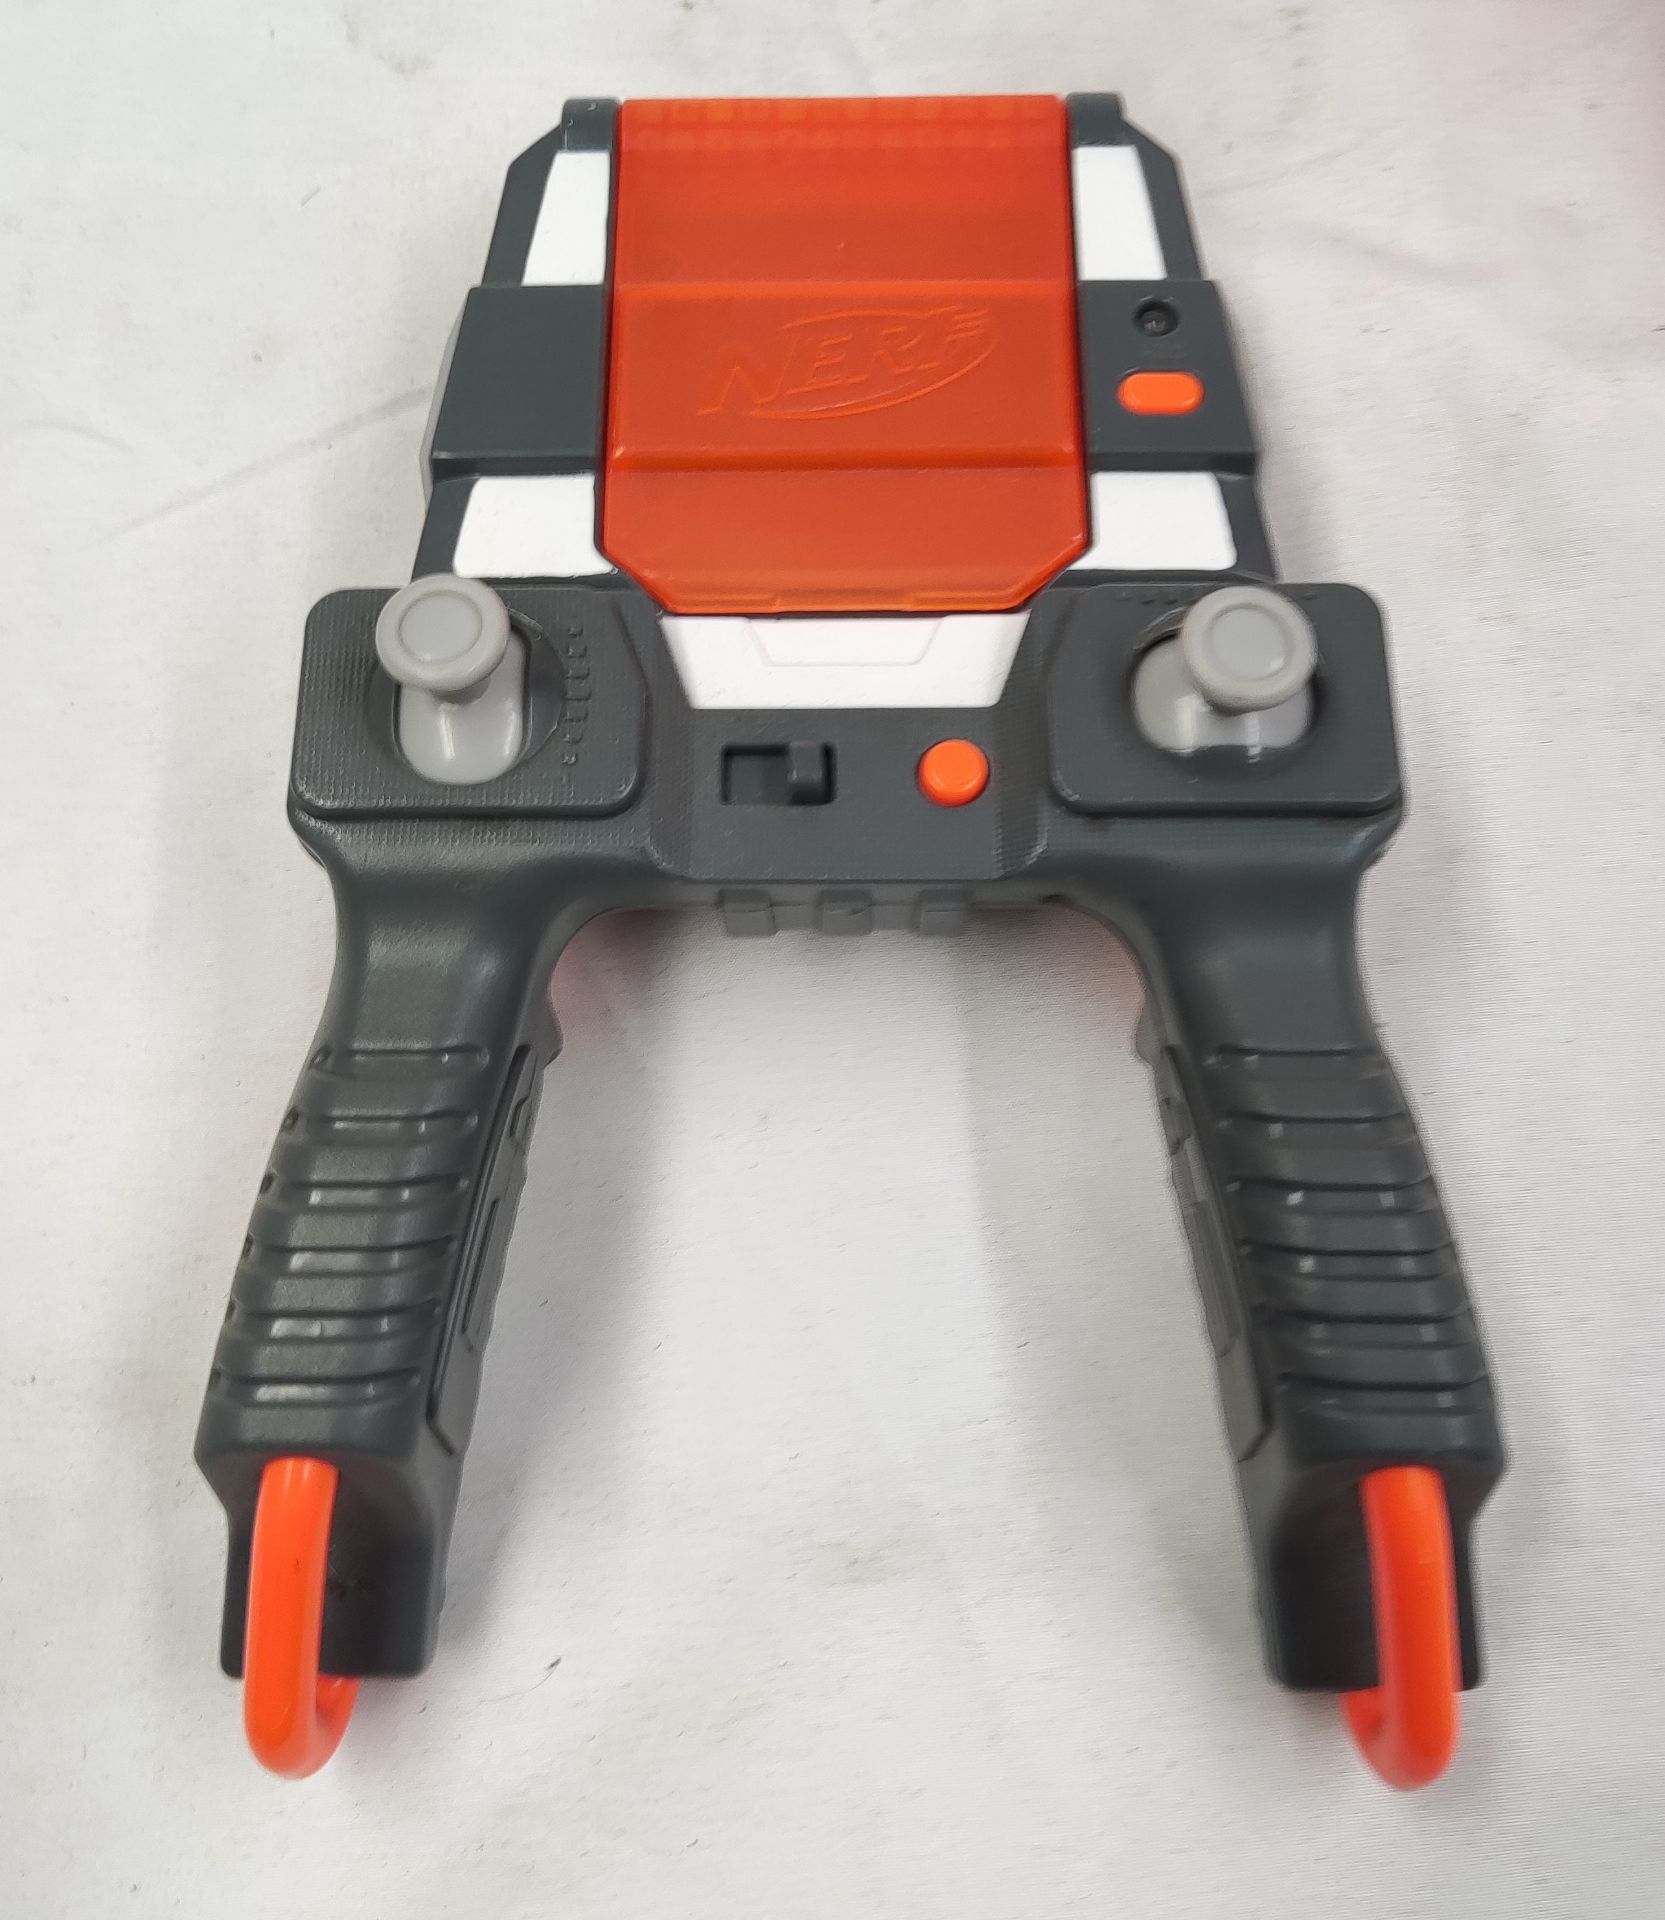 1 x Nerf Terrascout Remote Control Nerf Tank With Video - Used - CL444 - NO VAT ON THE HAMMER - - Image 13 of 14